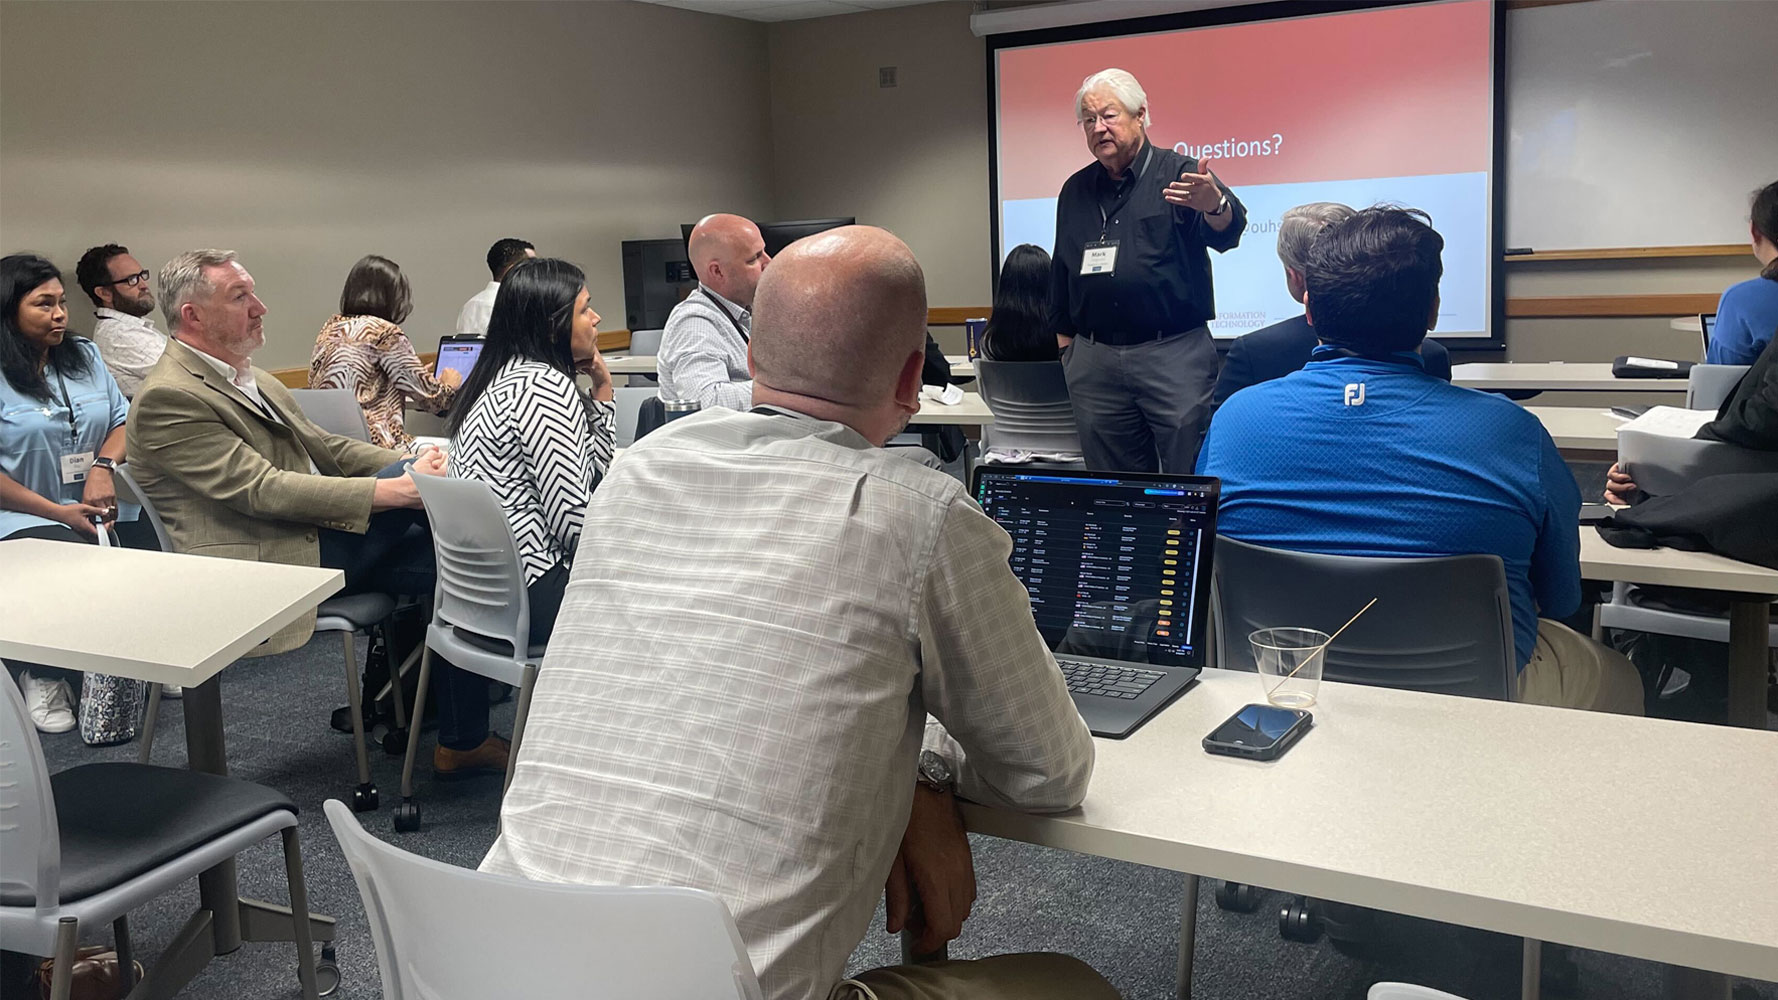 OU Enterprise IT Governance Director, Mark Ferguson, talks to a group about IT Governance at the 2023 Council on Information Technology Summit.